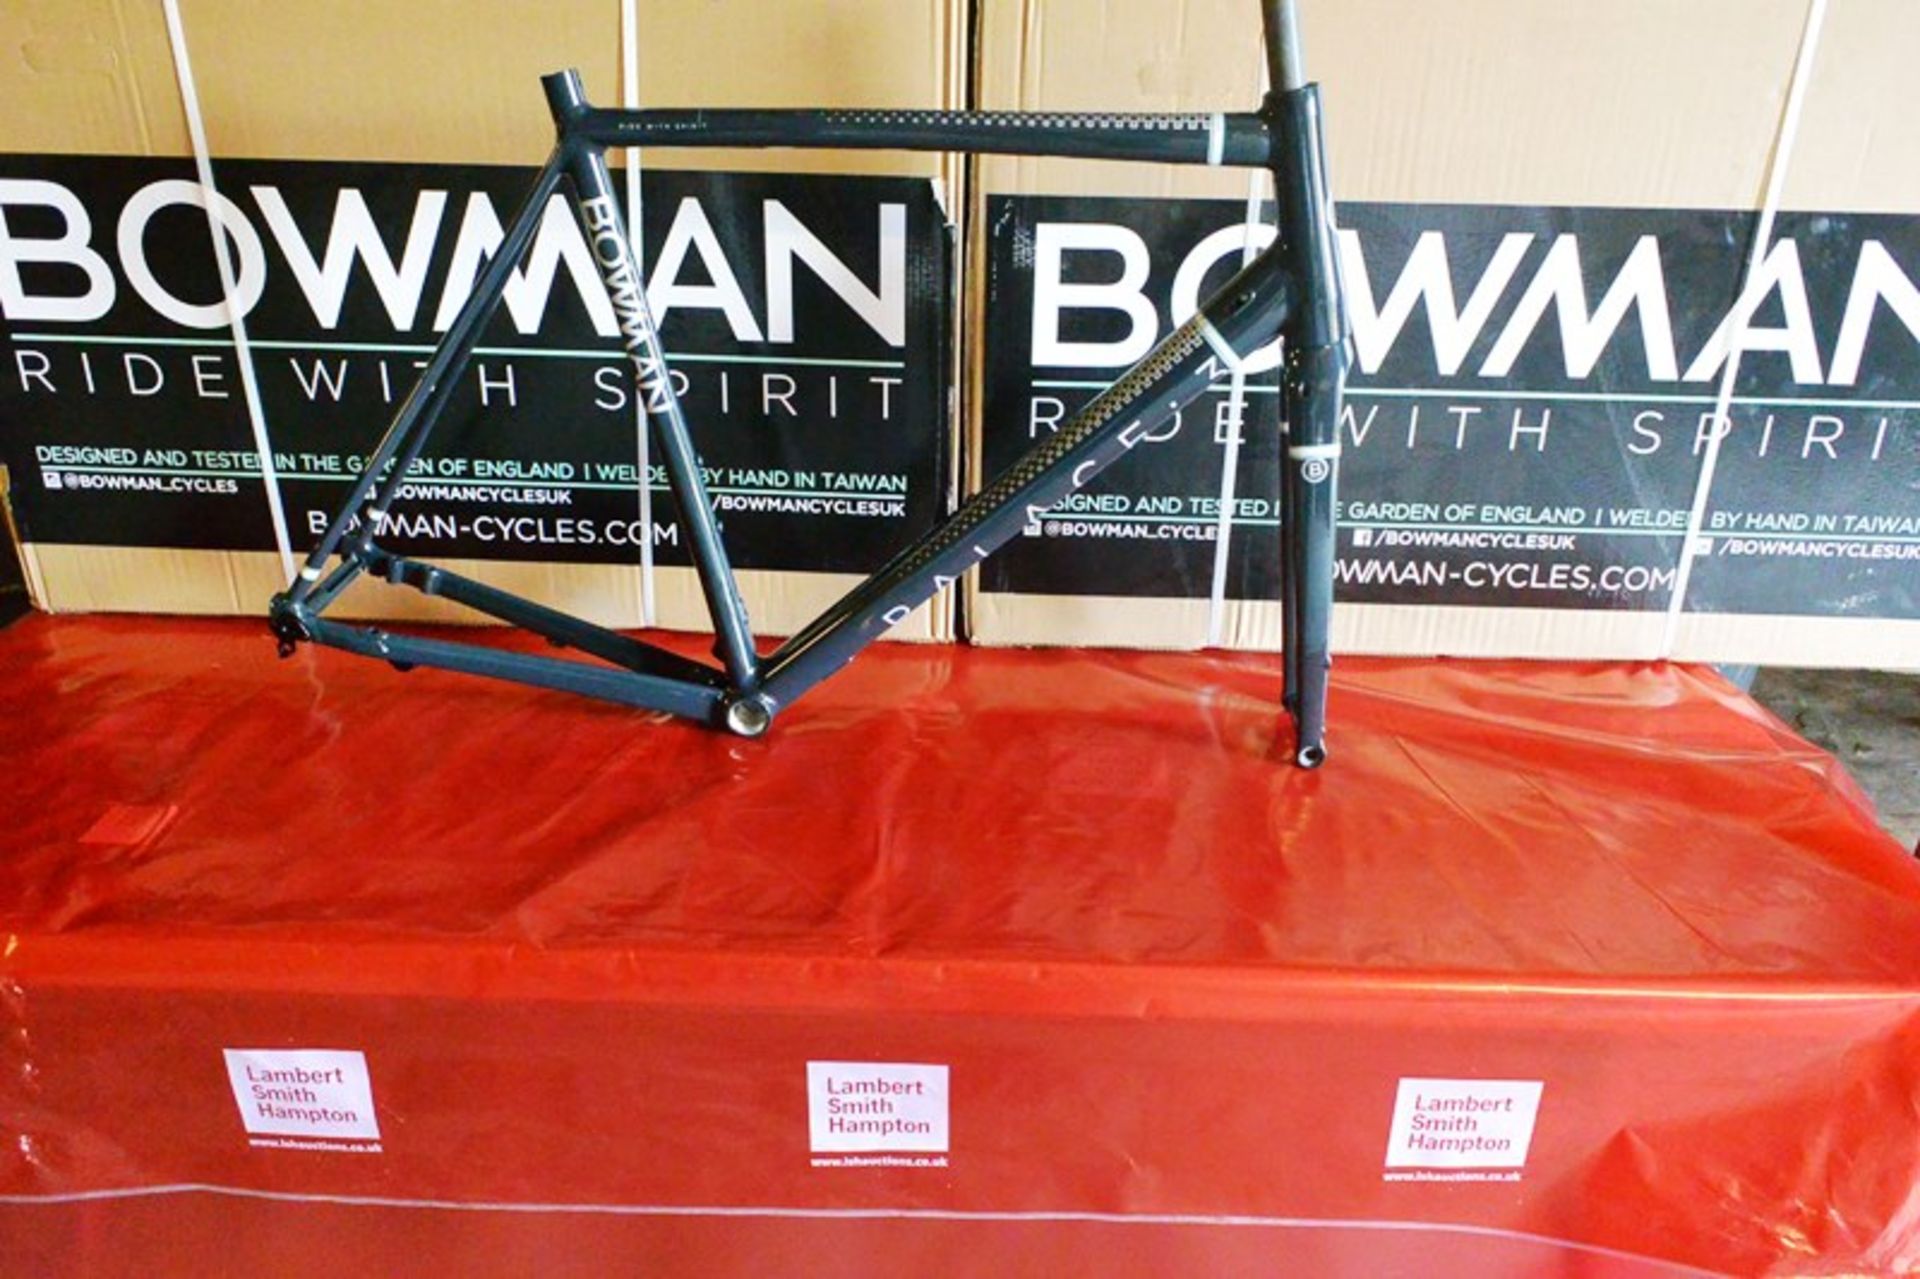 Bowman Palace 3 frame incl. forks (with original box)